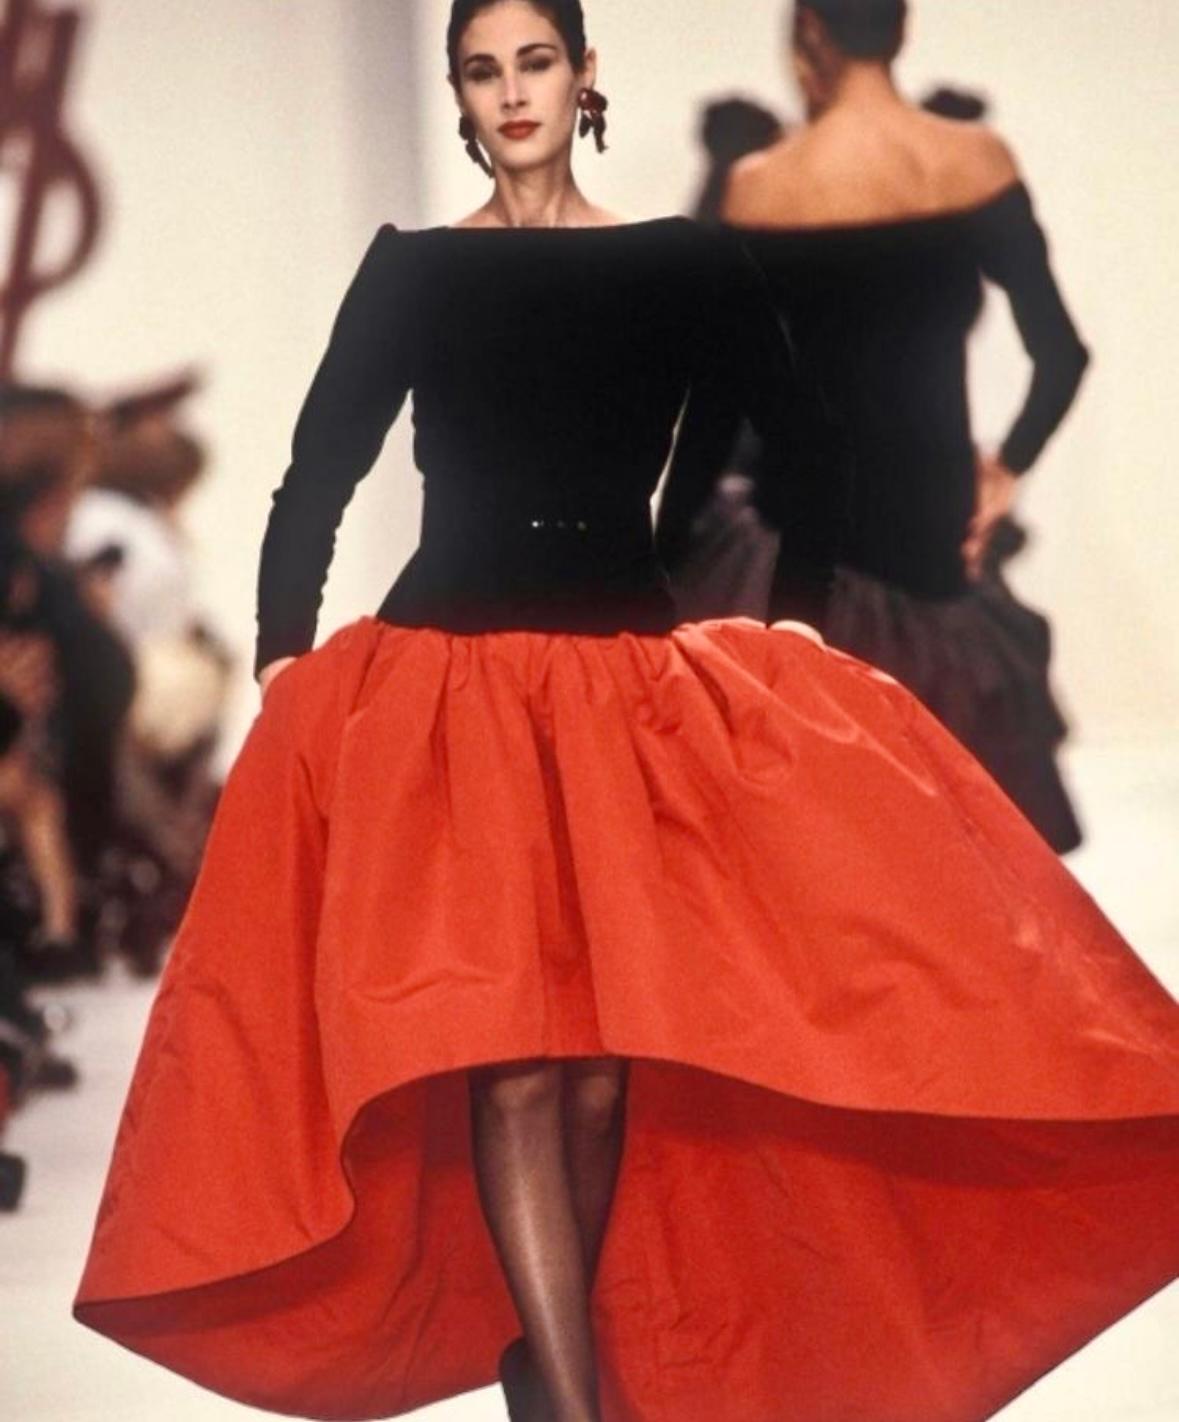 TheRealList presents: a fabulous black and red Saint Laurent Rive Gauche gown, designed by Yves Saint Laurent. From the Fall/Winter 1988 collection, this incredible dress debuted on the season's runway and was also highlighted in the season's ad